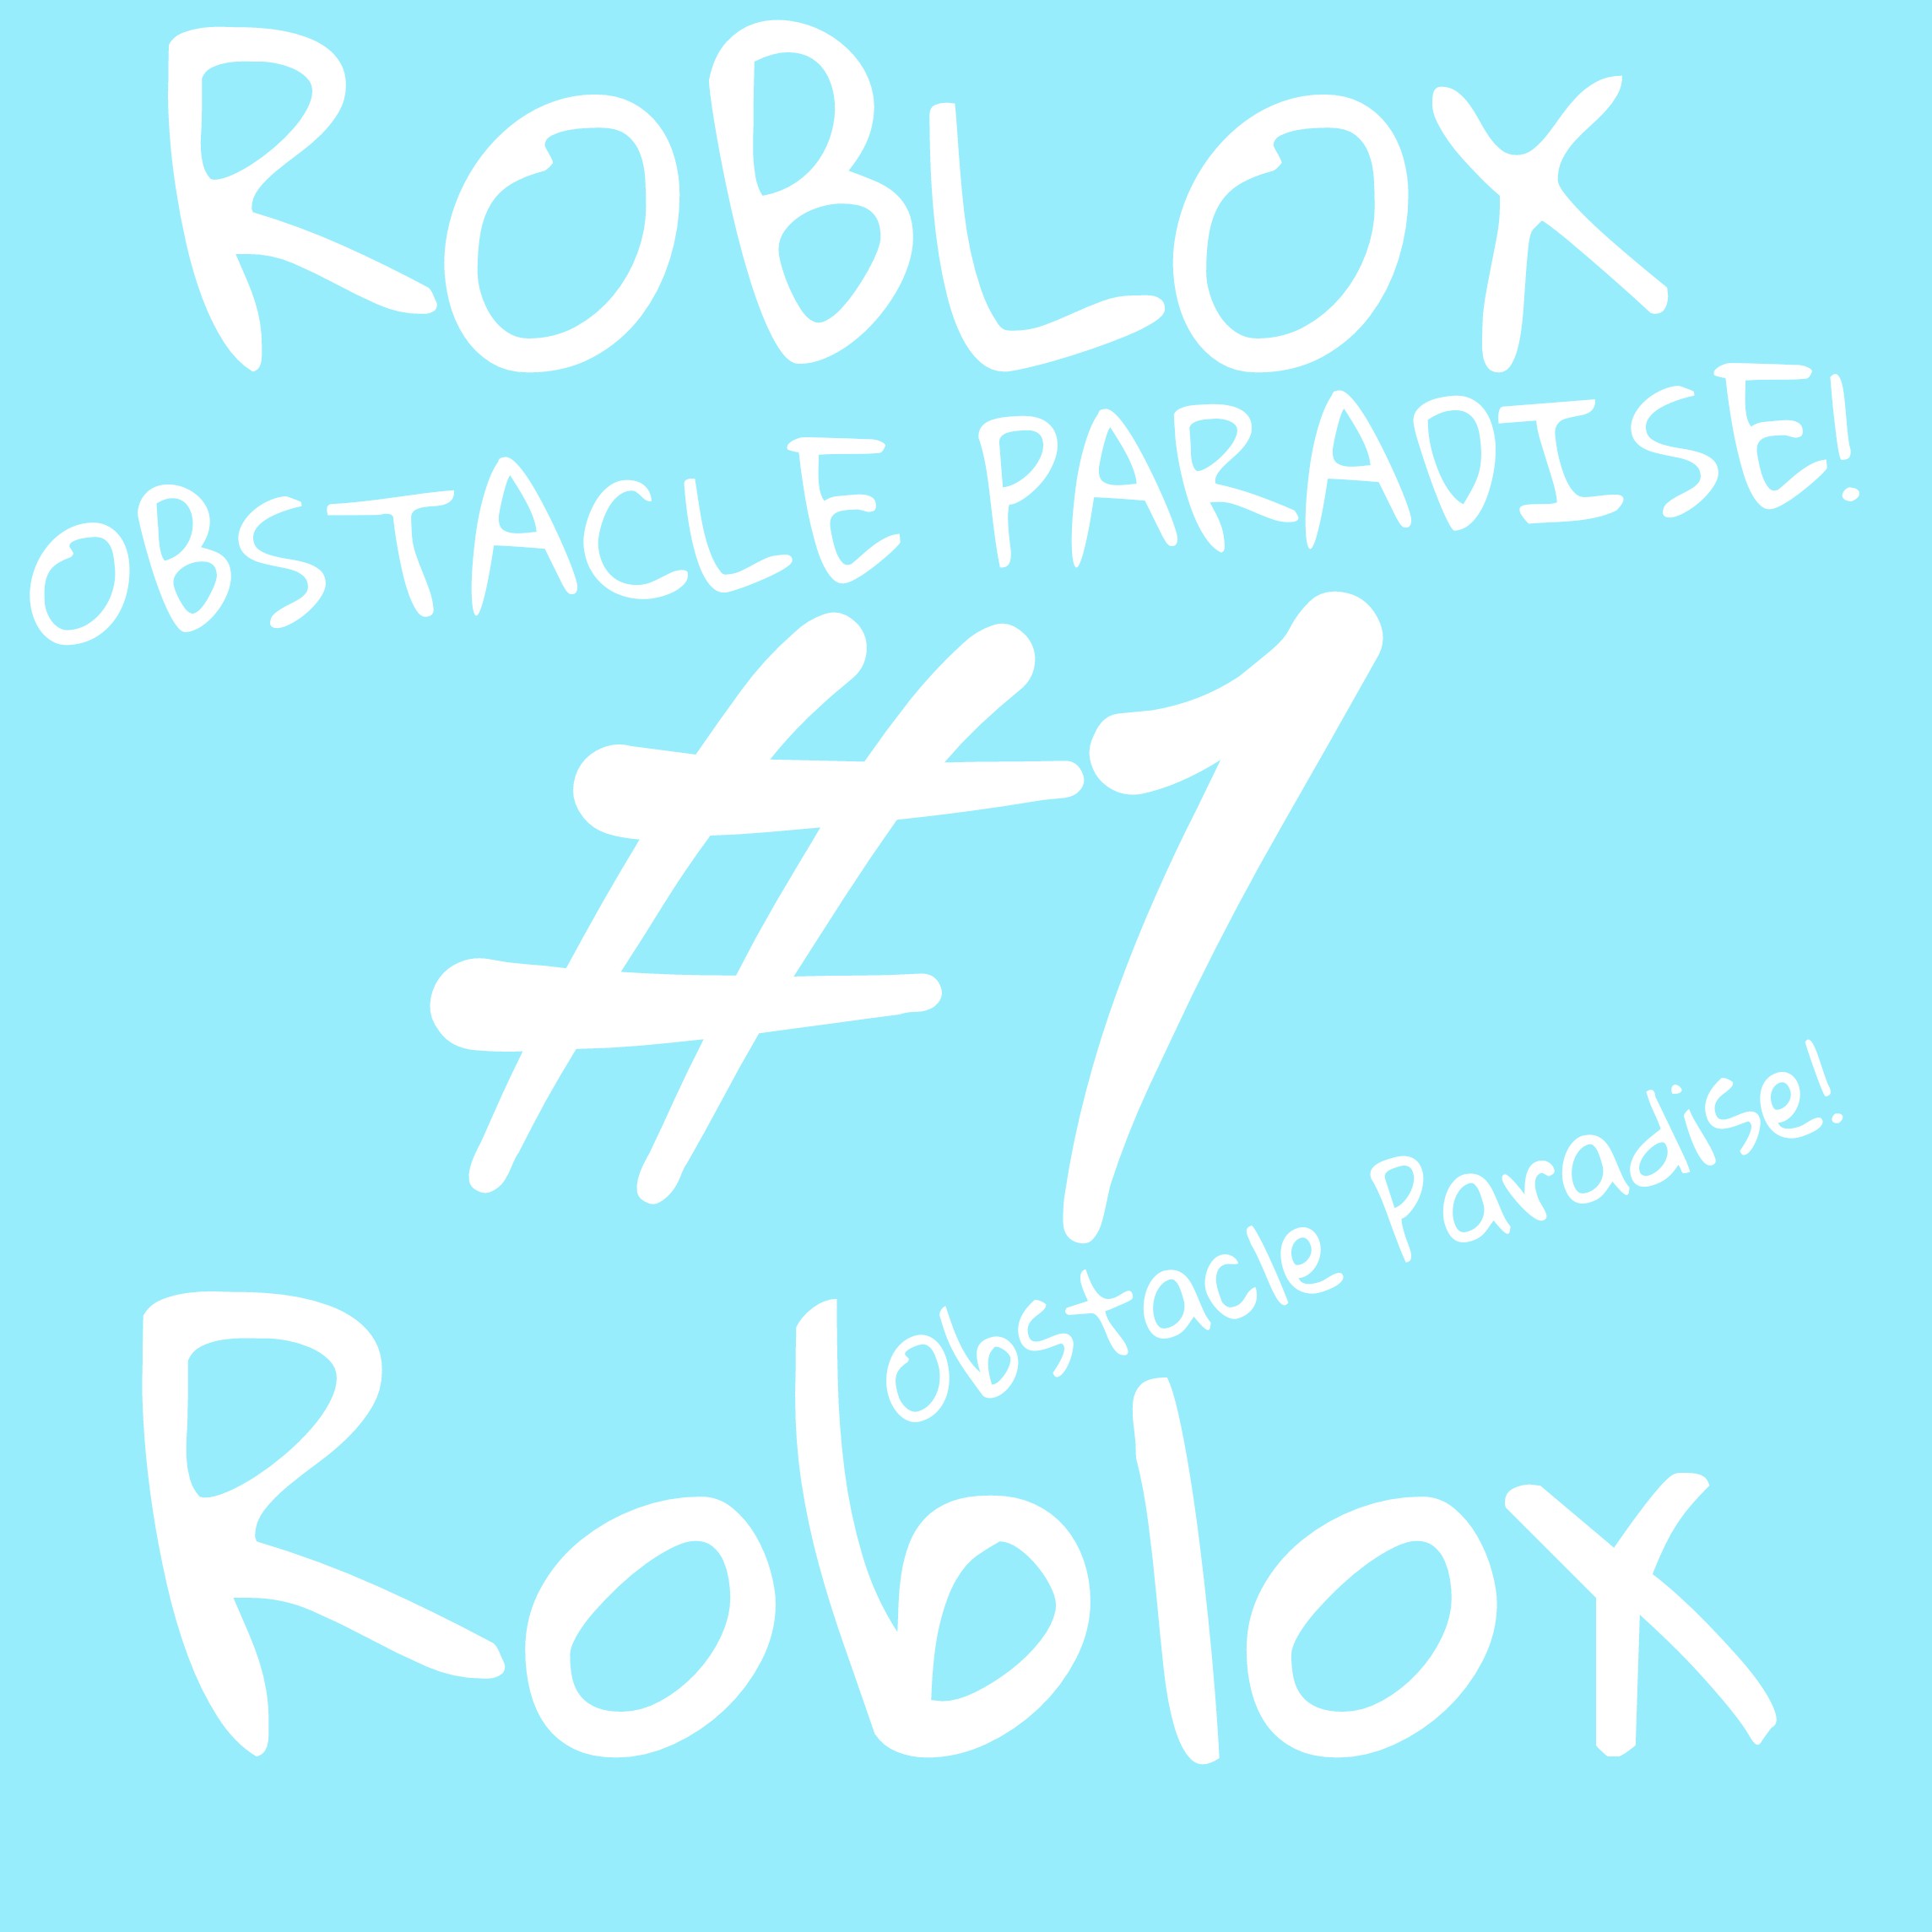 Freetoedit Robiox Obstacle Paradise Image By Bang413